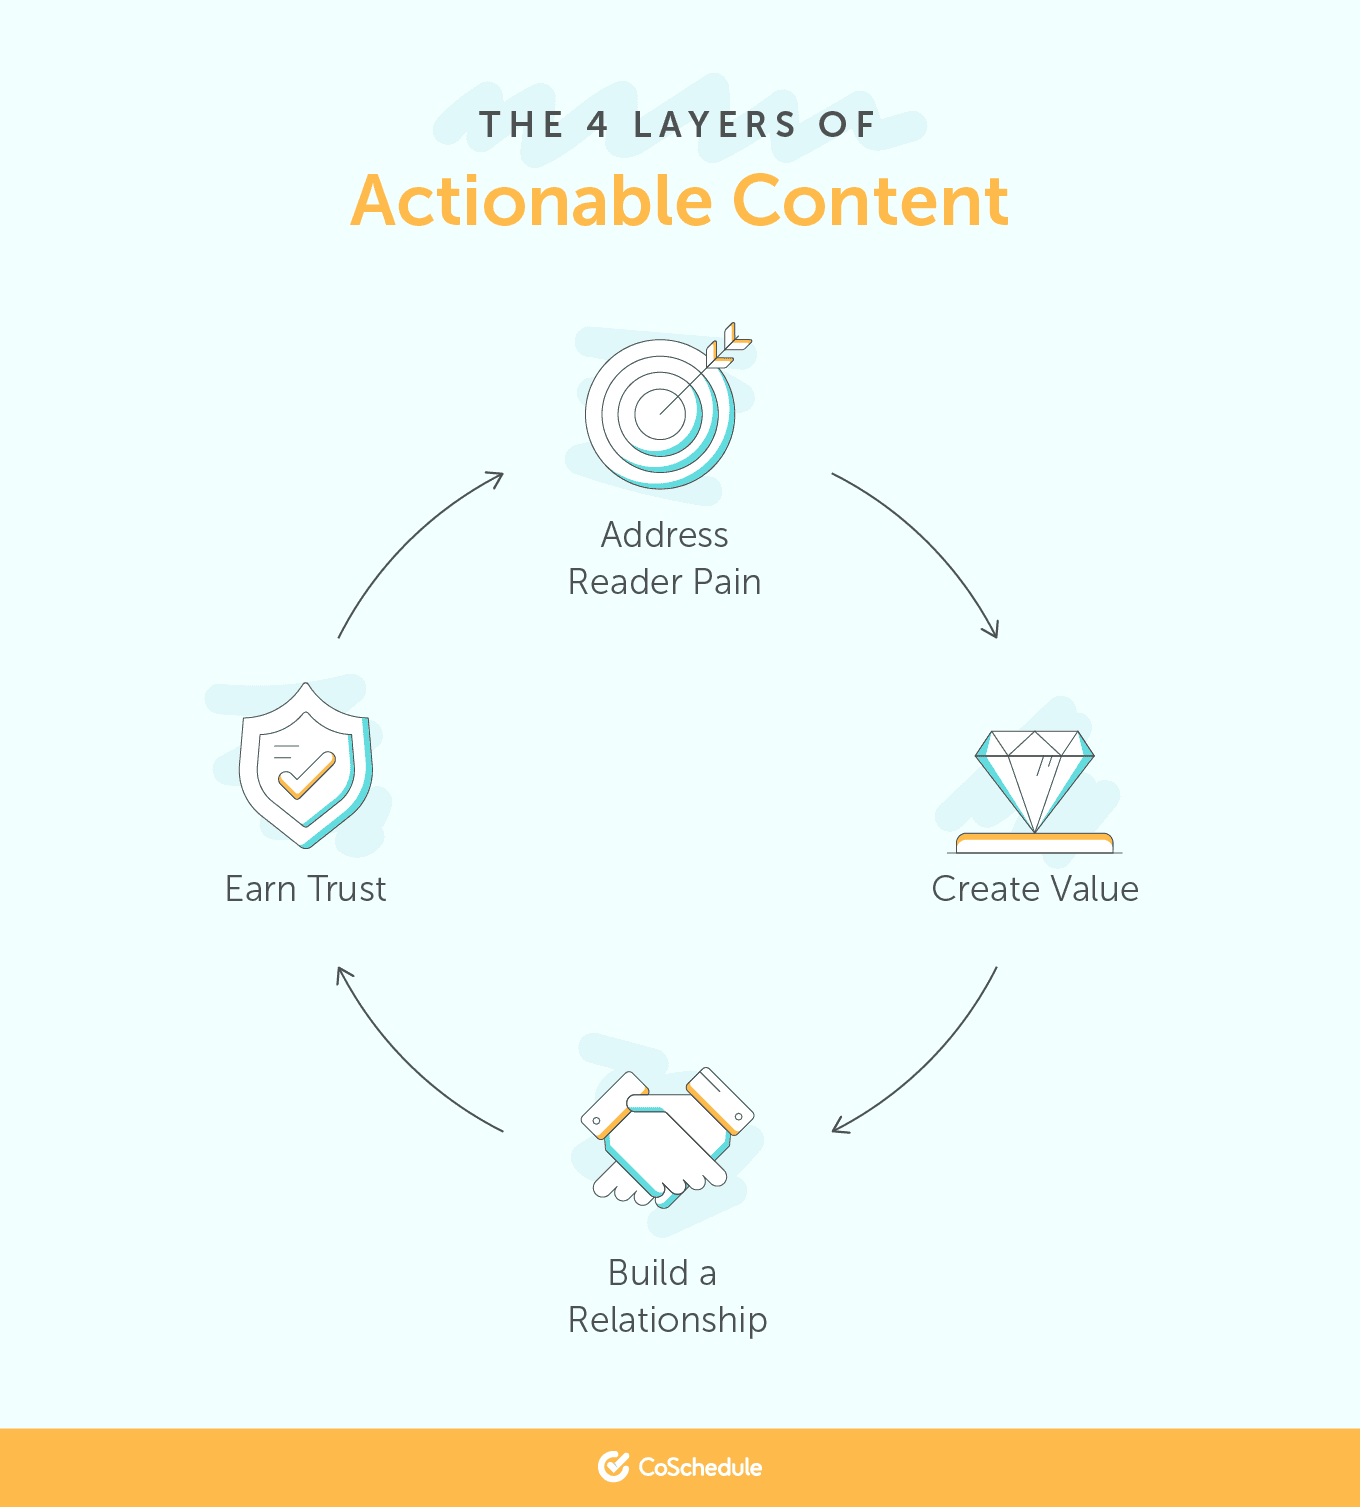 The 4 Layers of Actionable Content